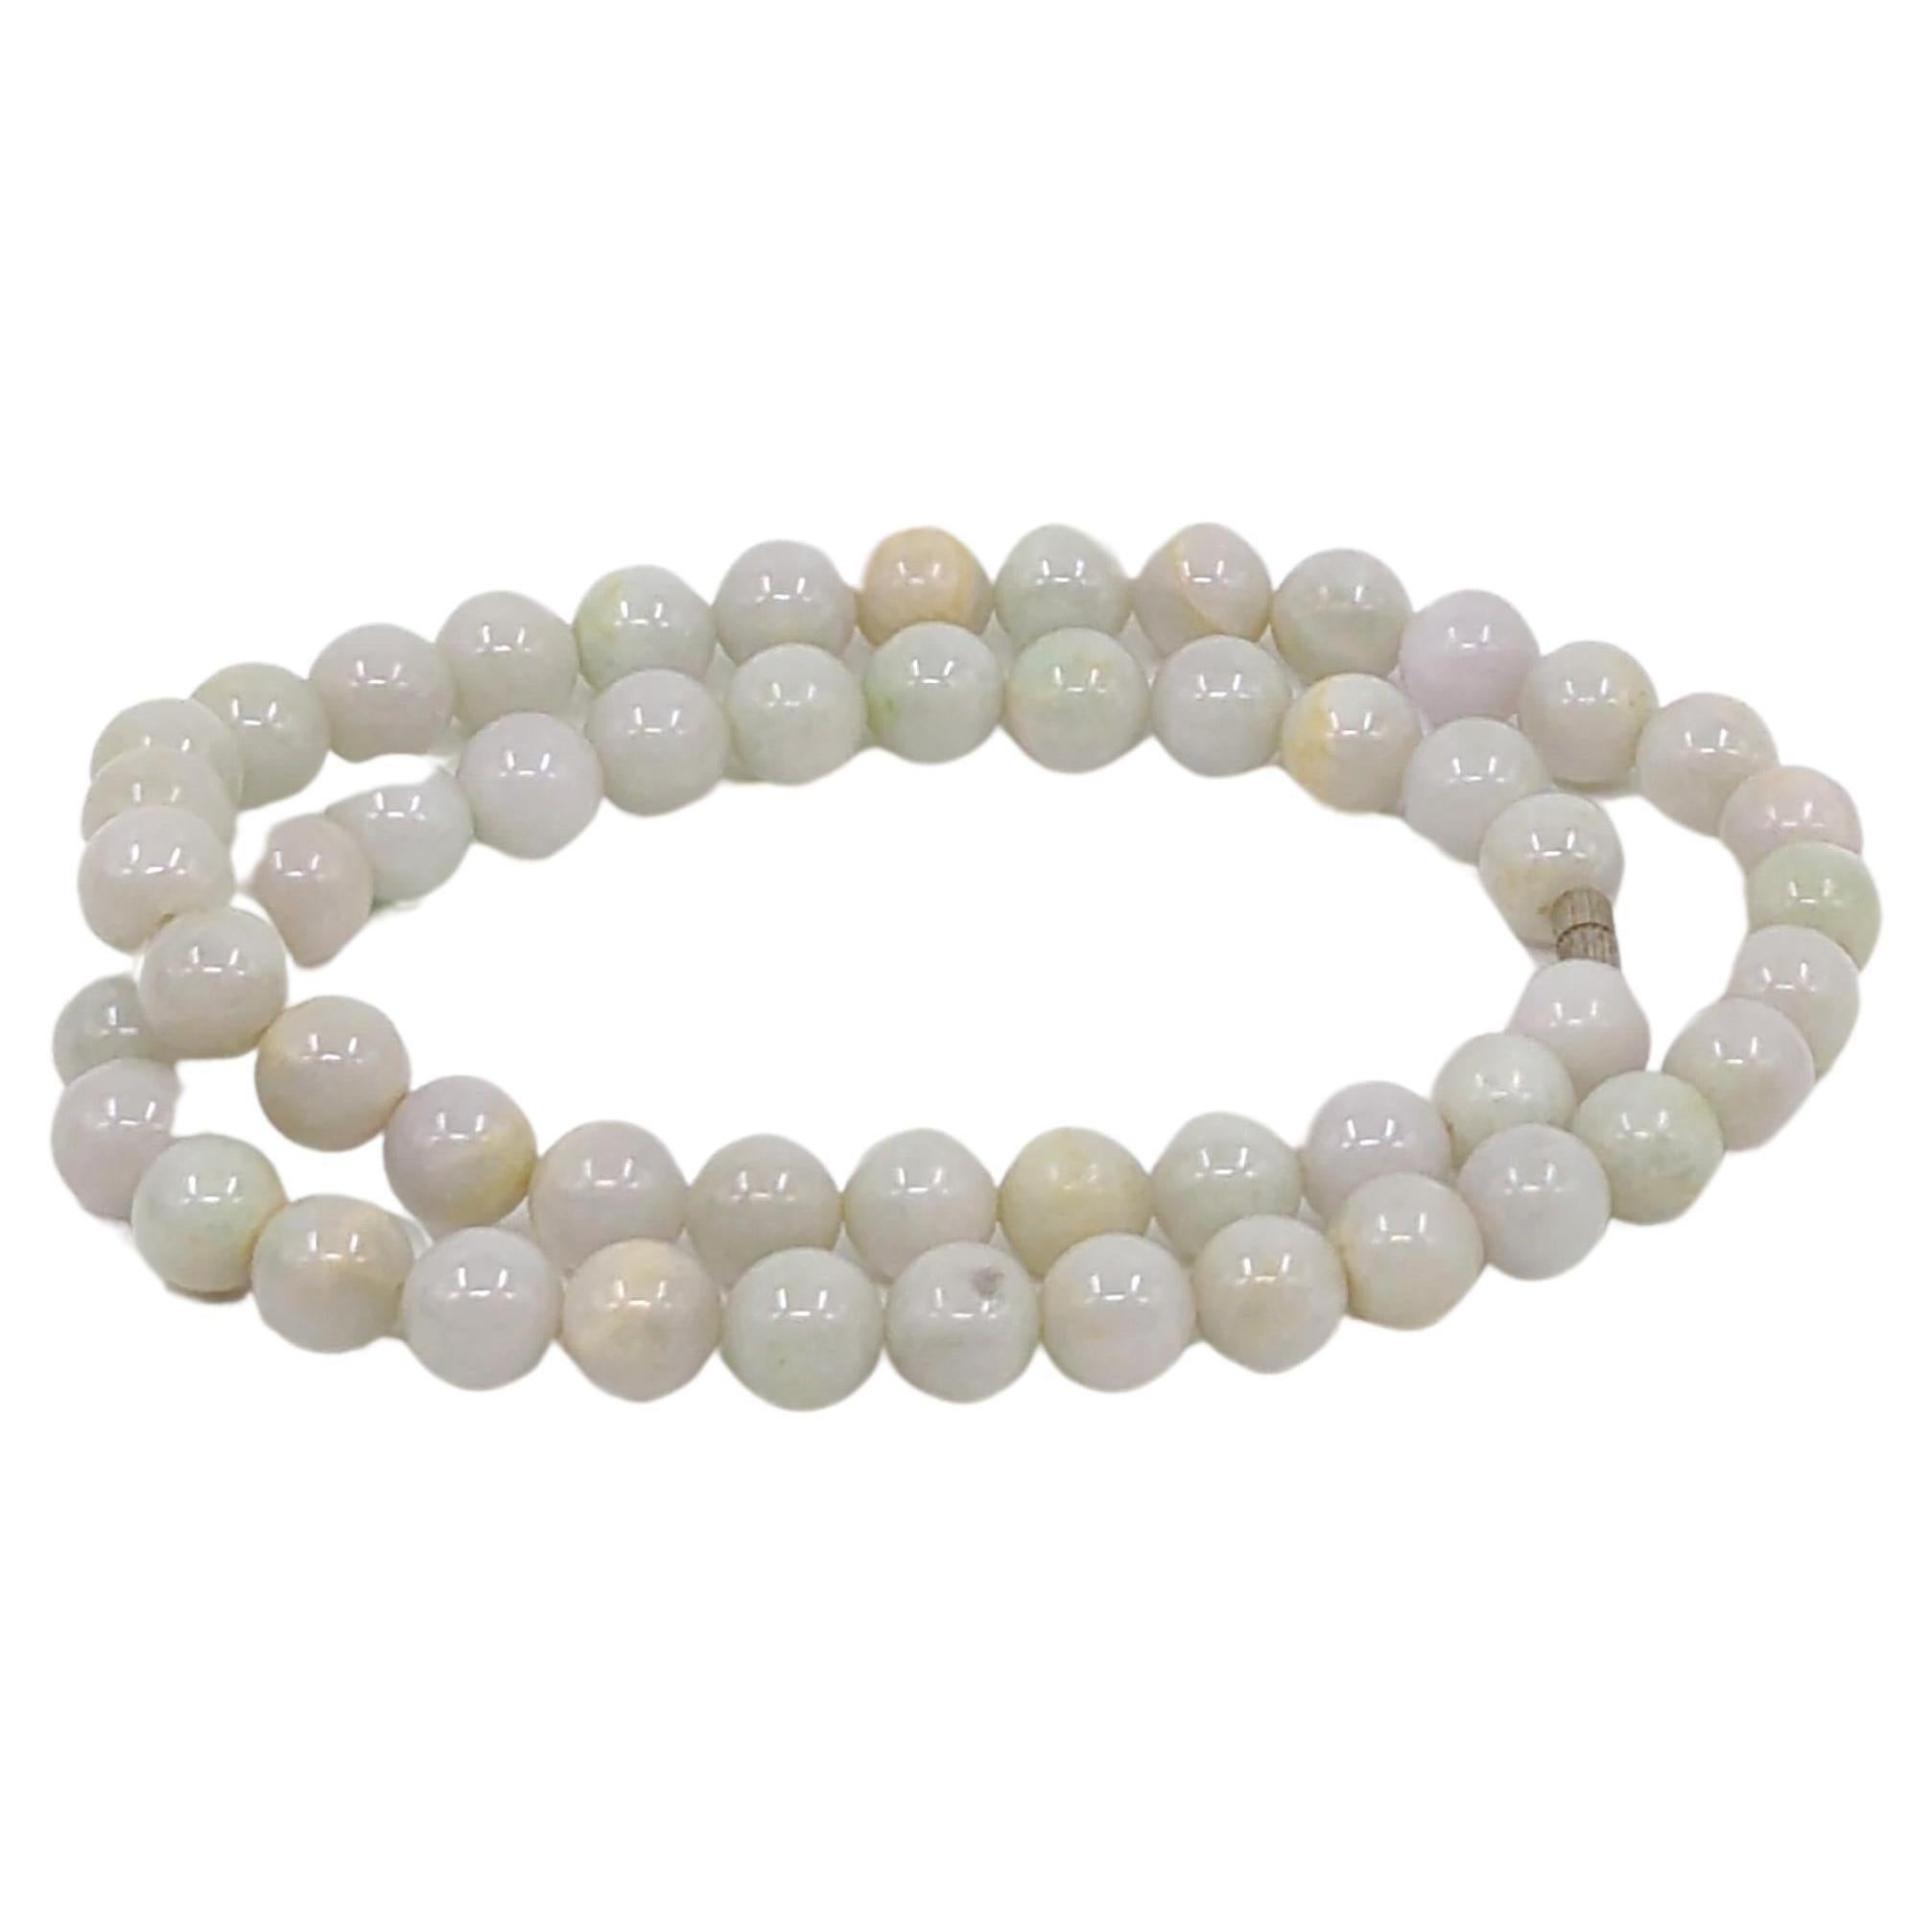 Elegant Natural White Jadeite Beaded Necklace A-Grade 55pc 11mm Beads 23